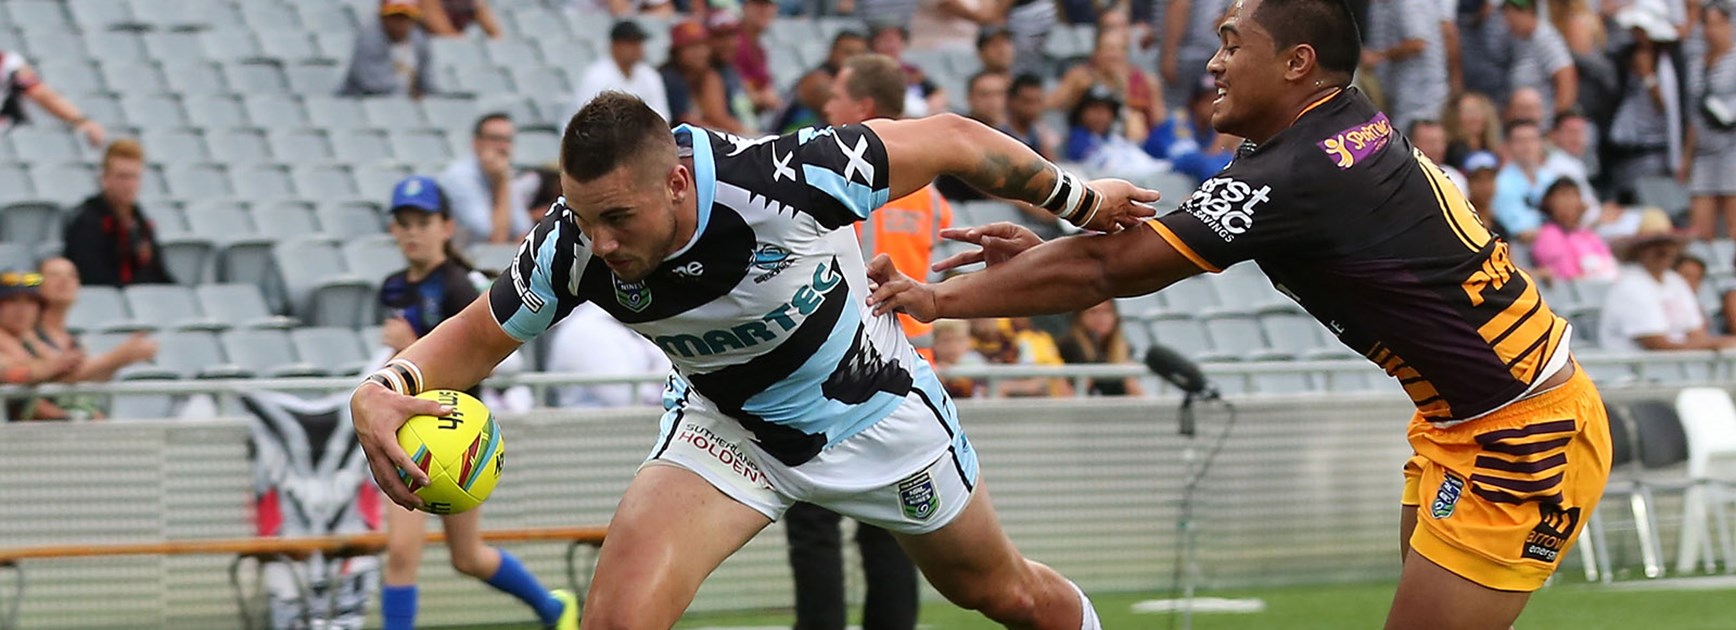 Cronulla rookie Jack Bird scores a try for the Sharks at the 2015 Auckland Nines.